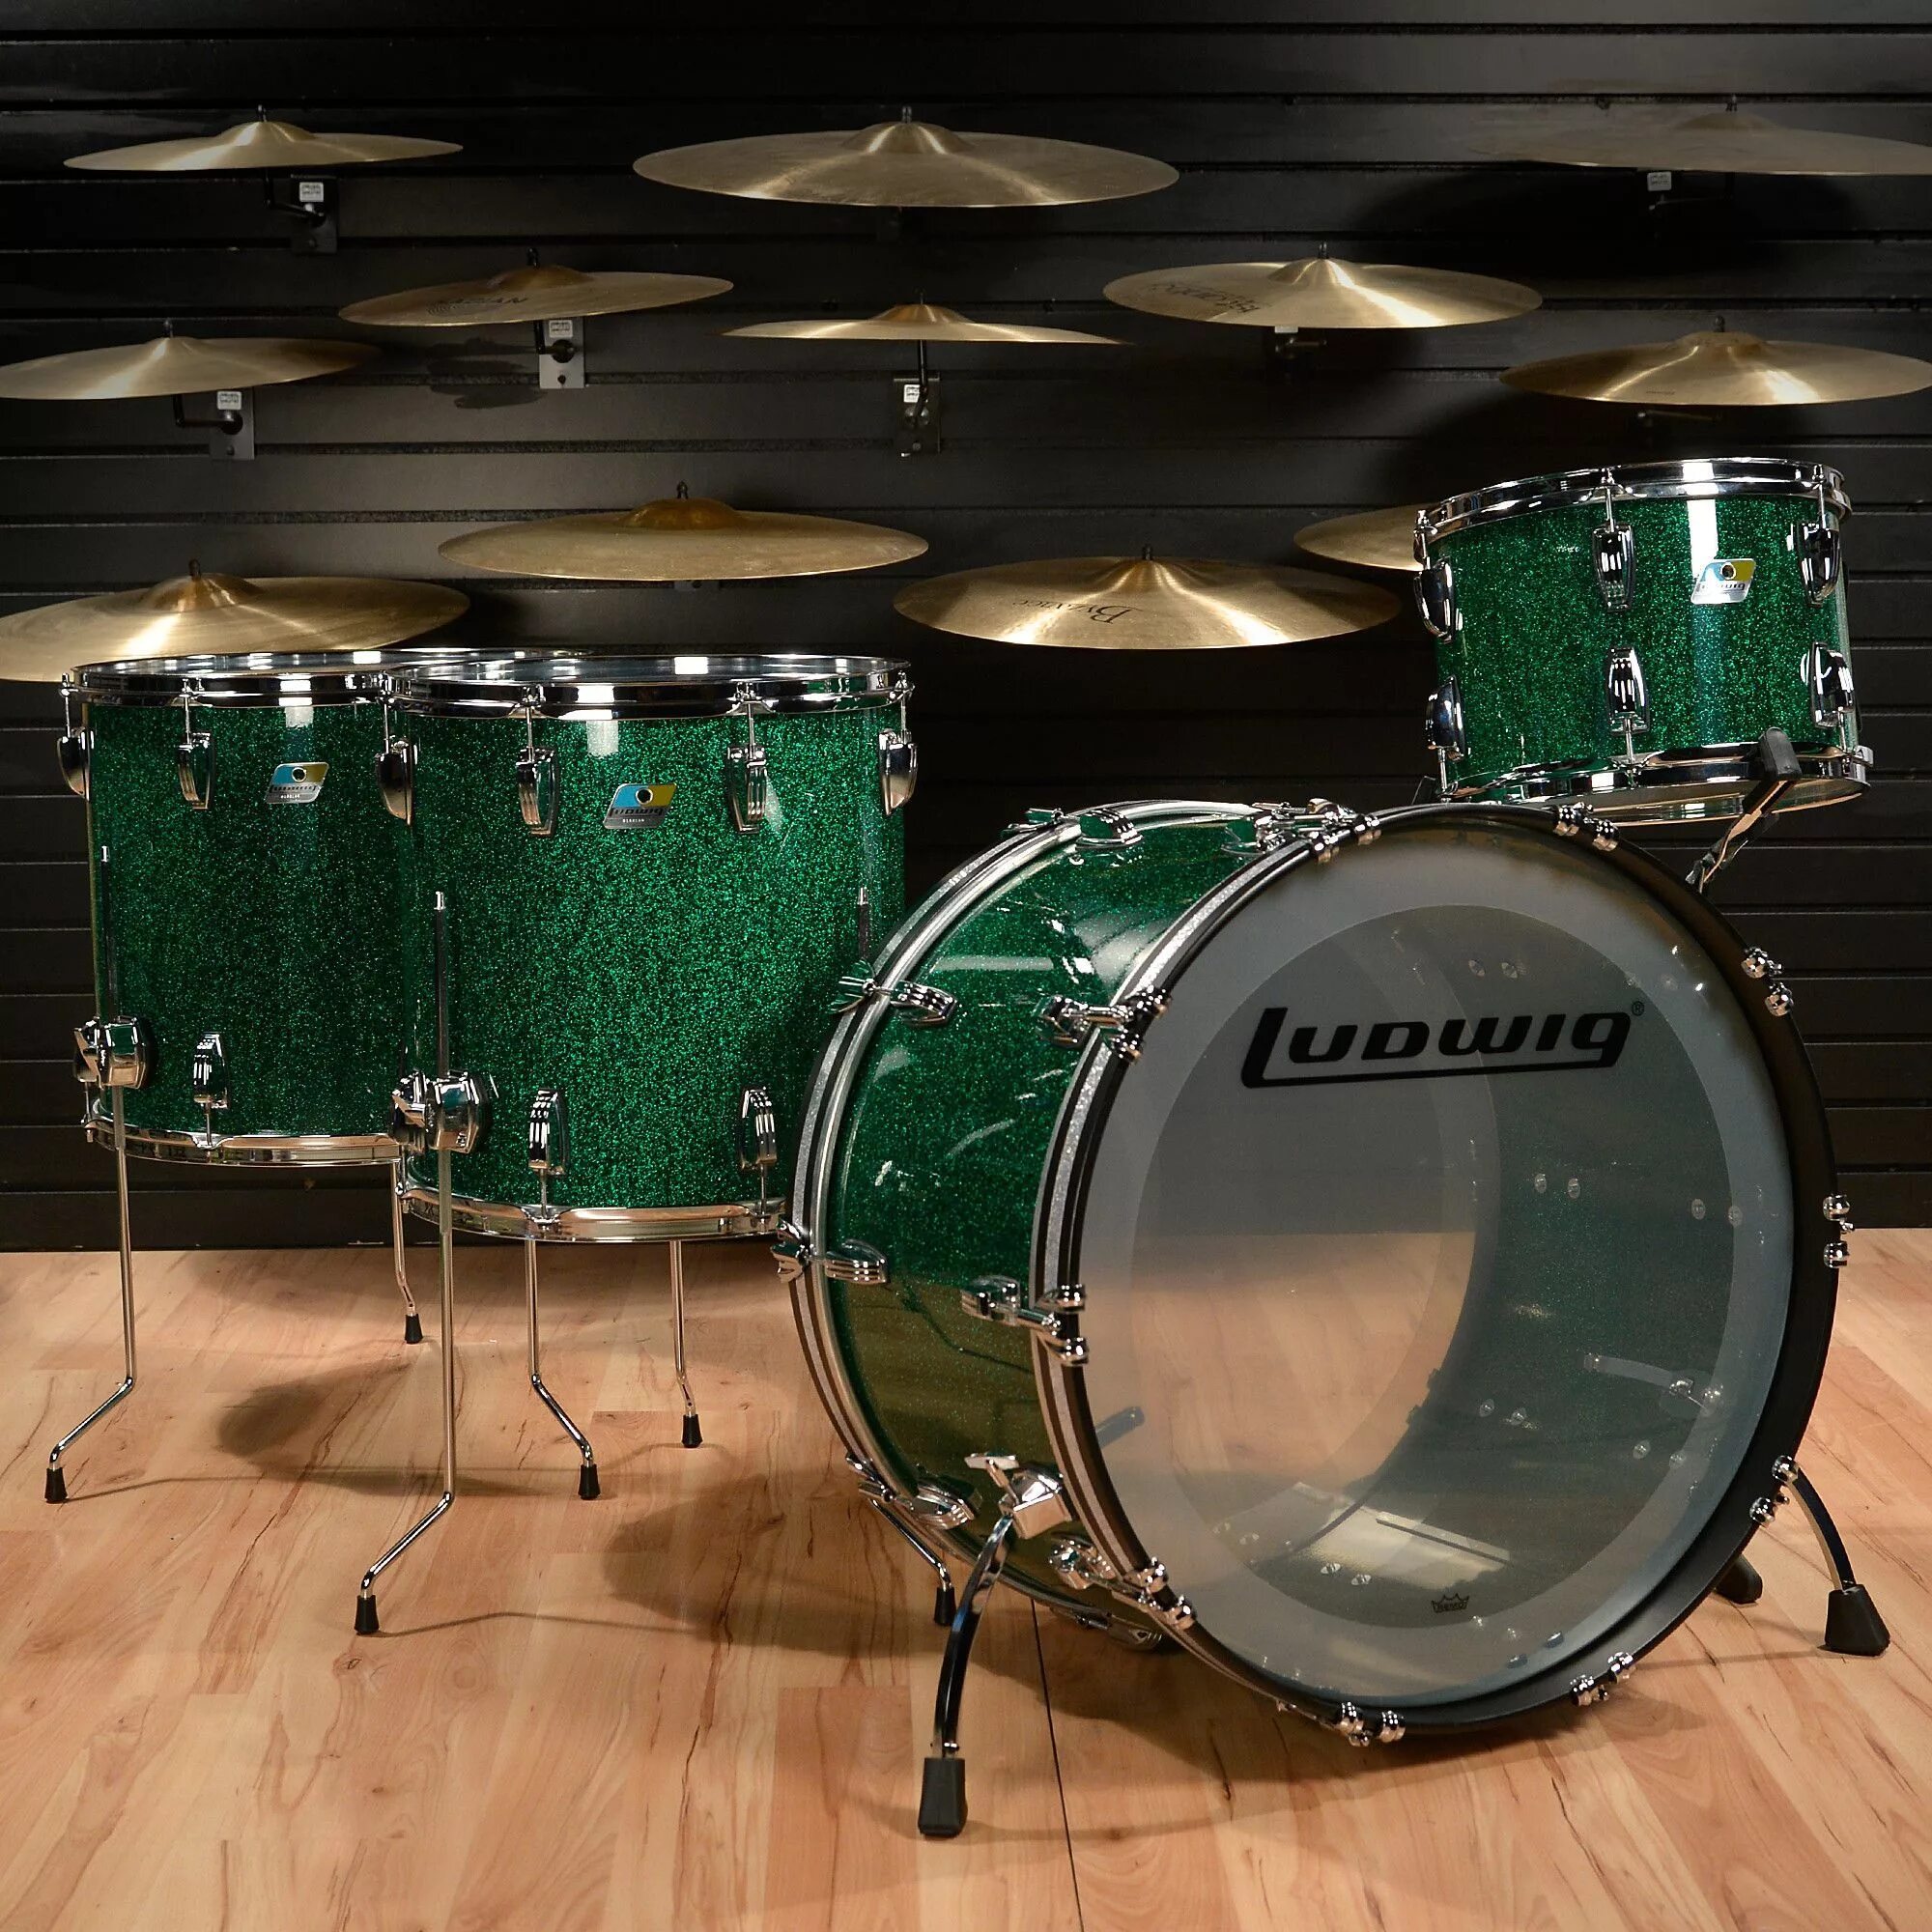 Many bass. Ludwig Vistalite. Ludwig 125 Drums. Ludwig Drums Green.